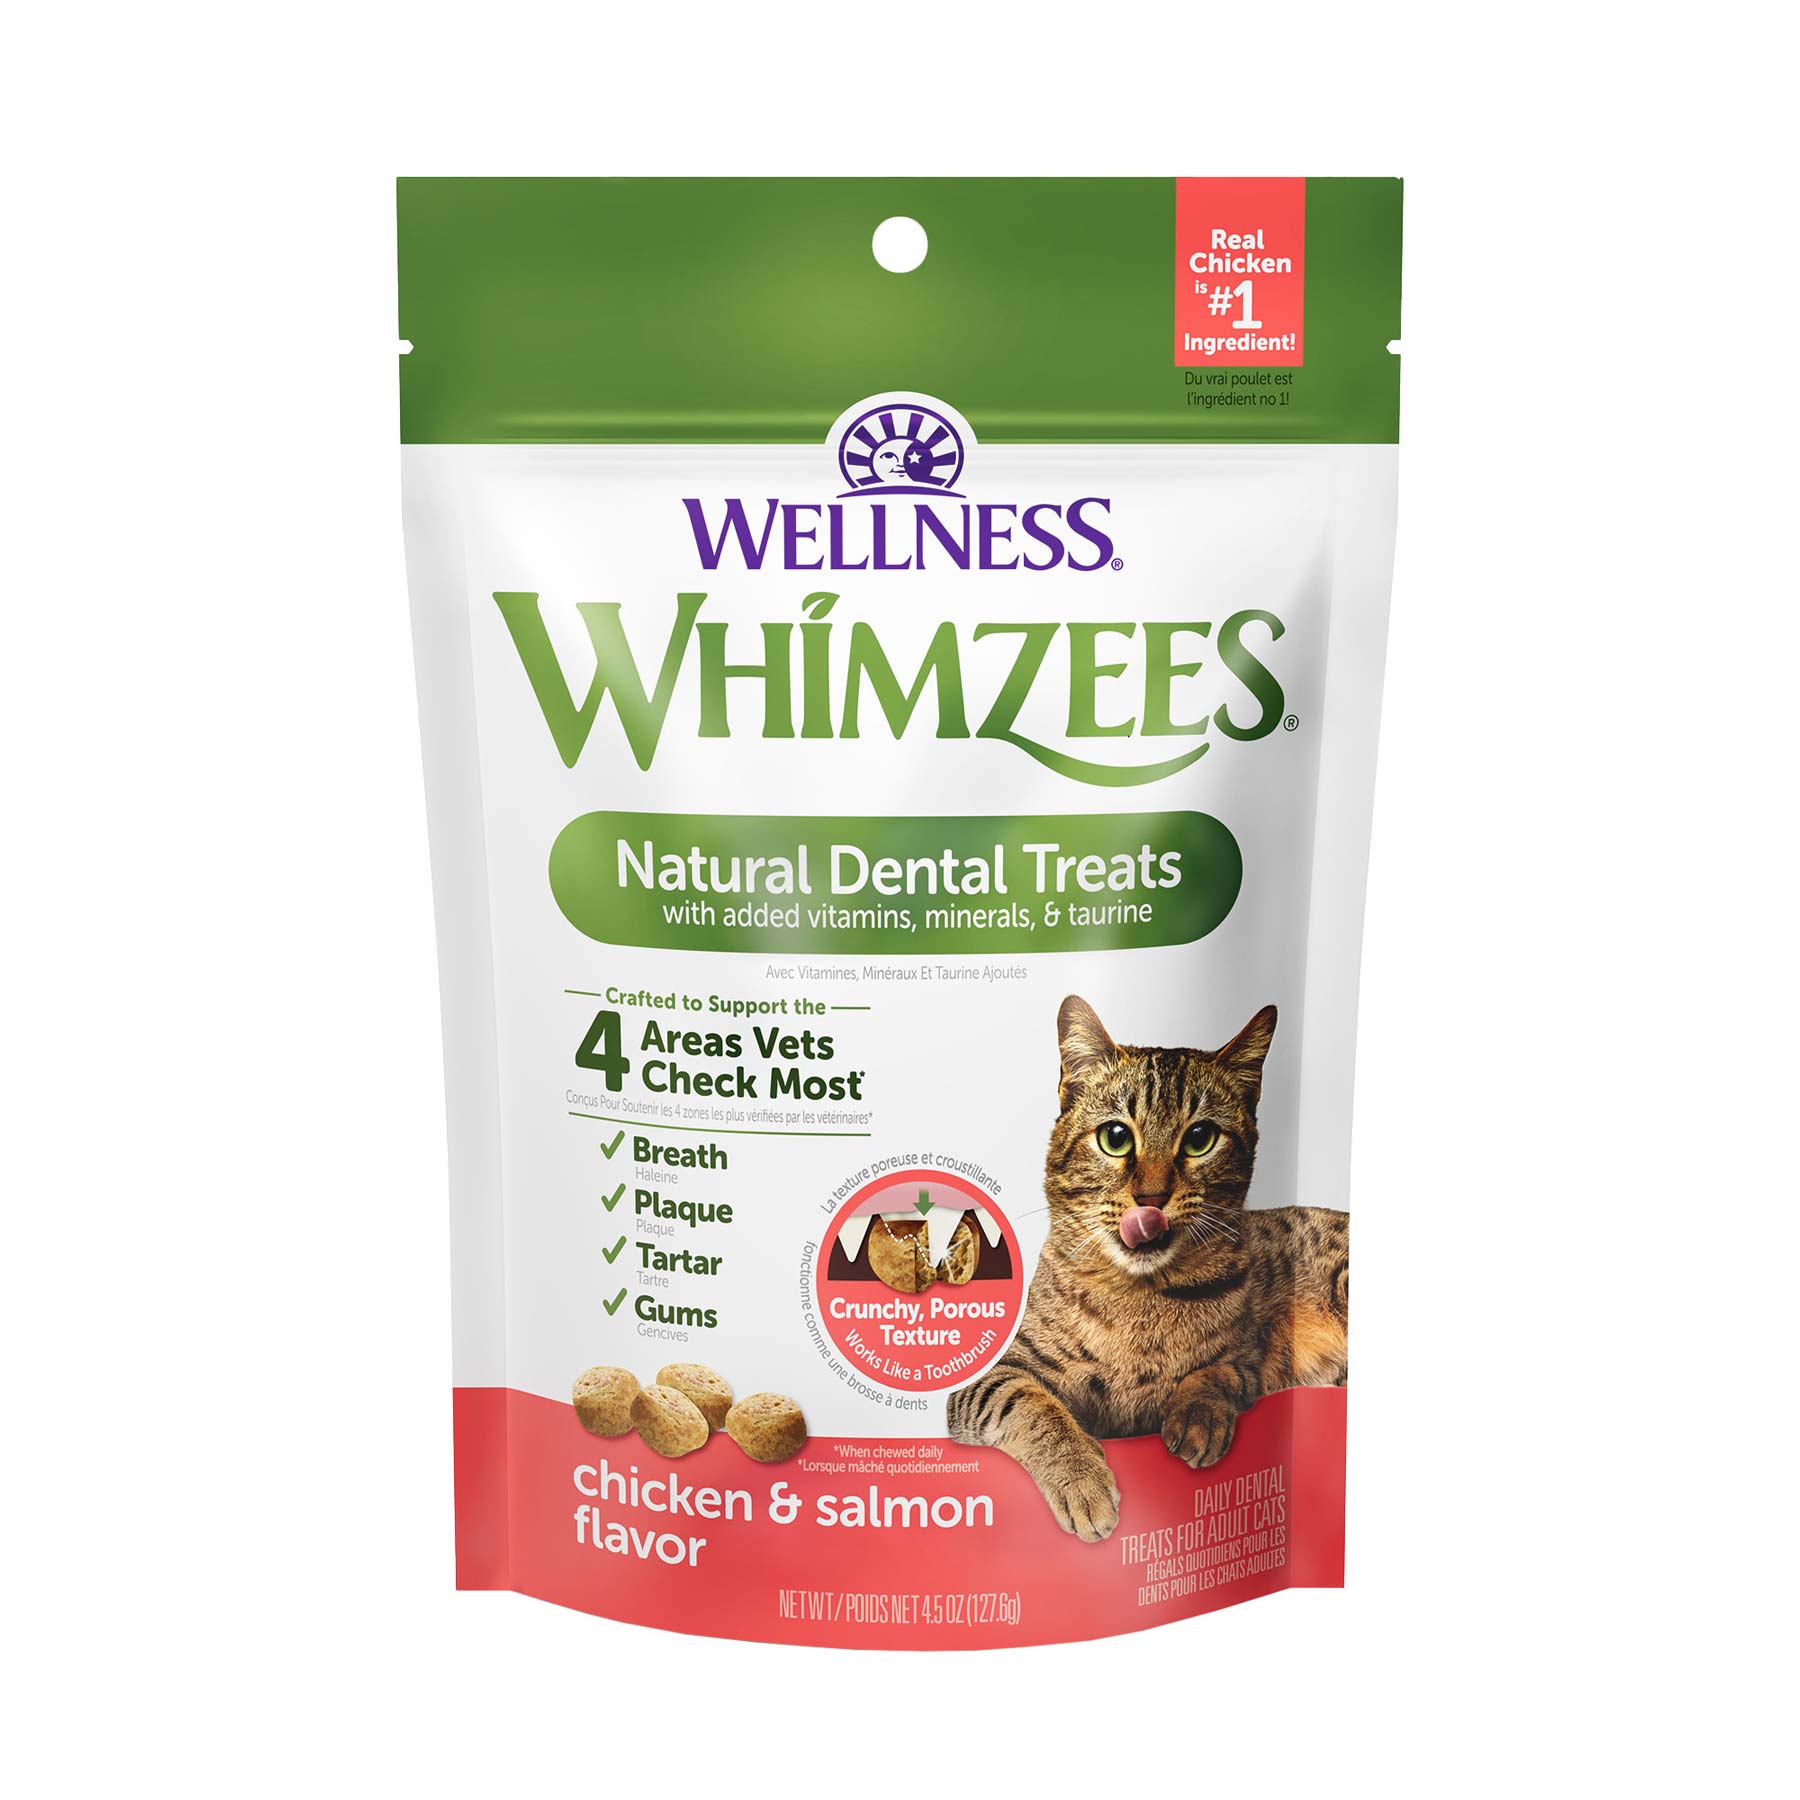 Wellness WHIMZEES Natural Cat Dental Treats, Chicken & Salmon Flavor, 4.5 Ounce